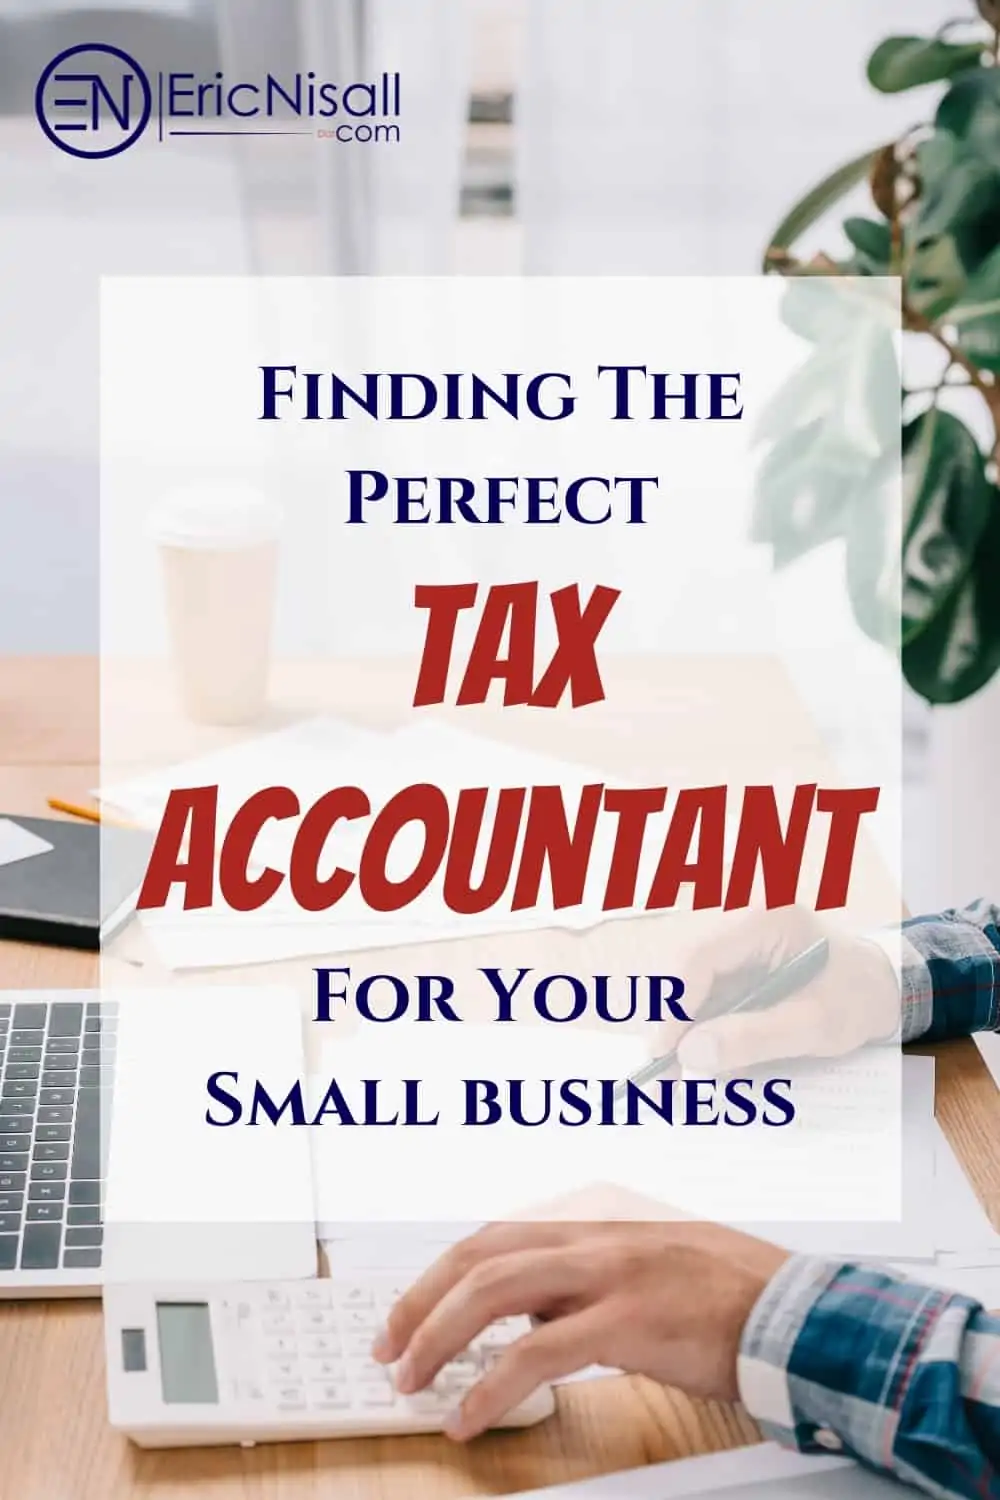 When it comes to hiring a tax accountant, you need to be selective. Not every accountant will be right for your business. These tips will help you hire the right person. via @ericnisall